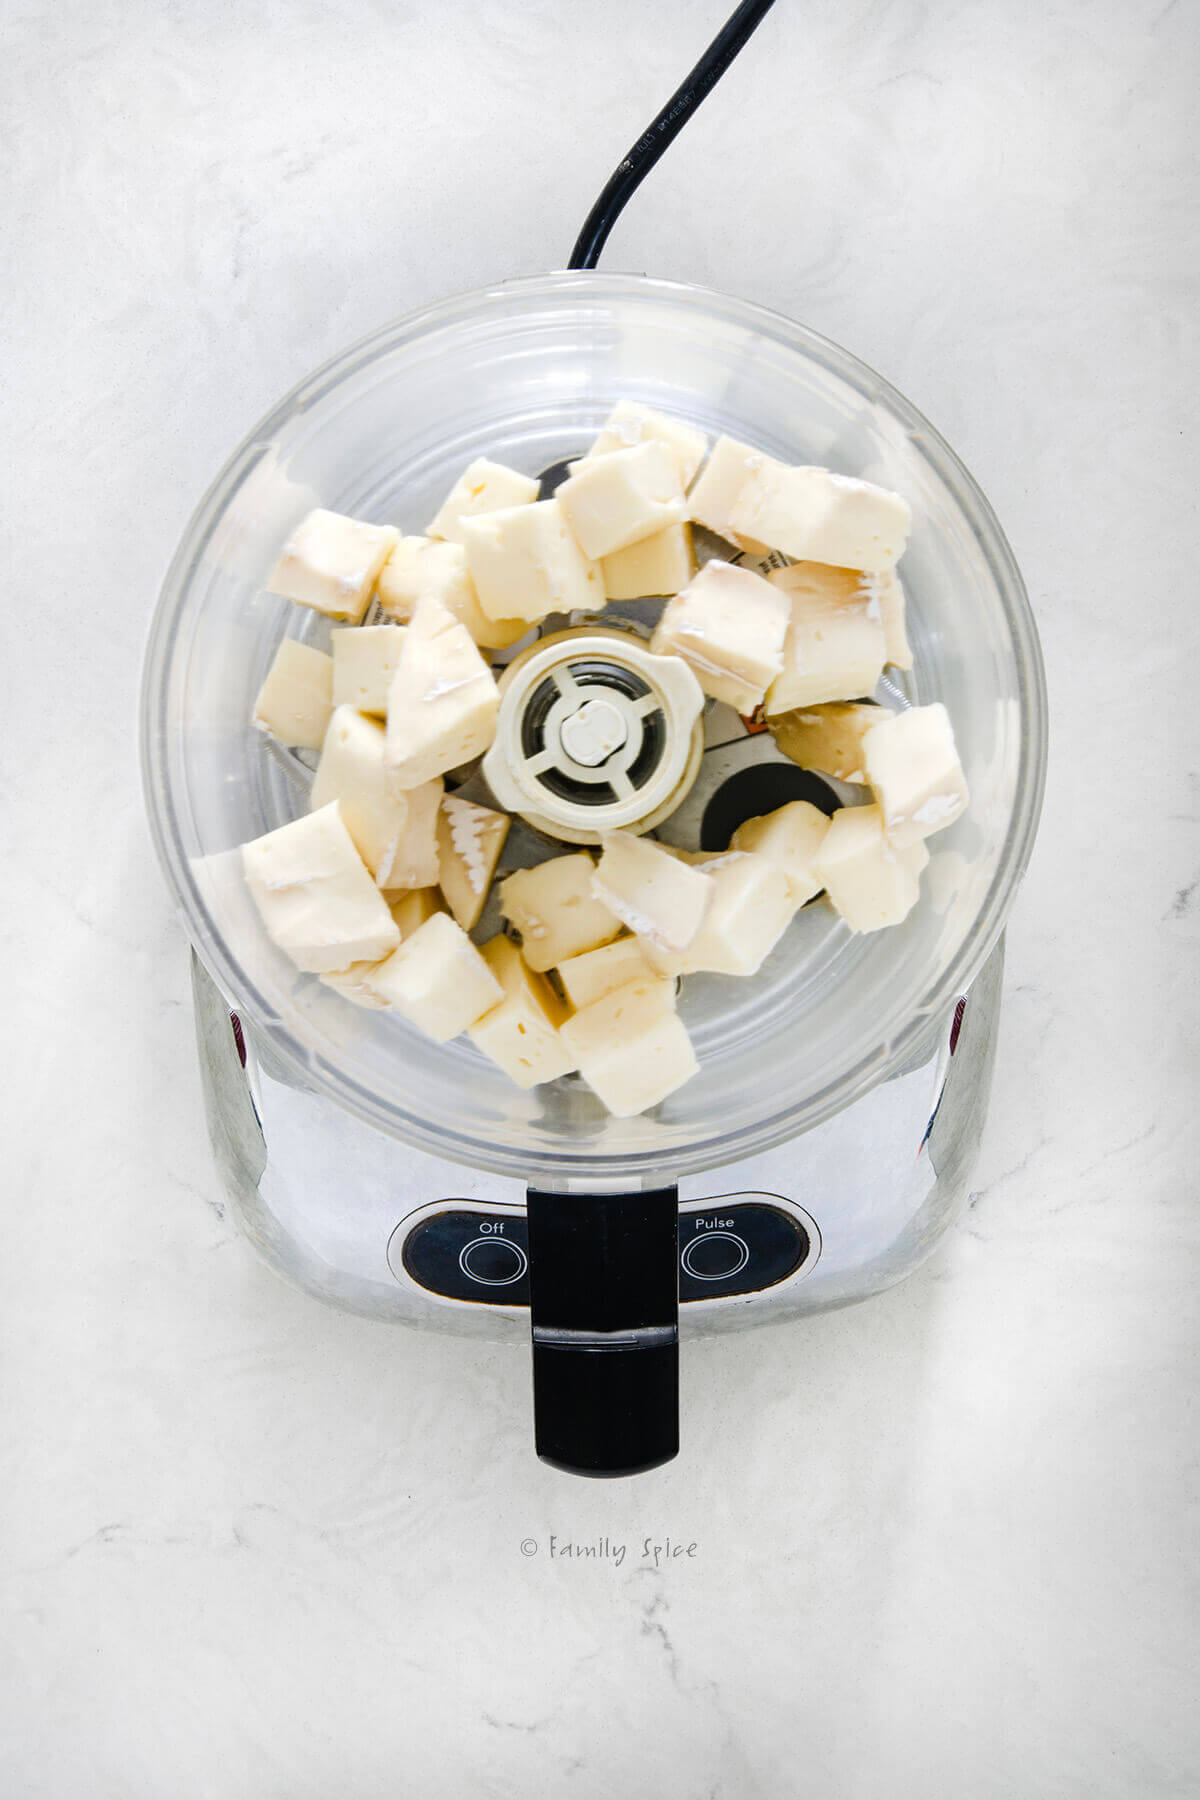 Top view of a food processor with cubed chunks of brie in it